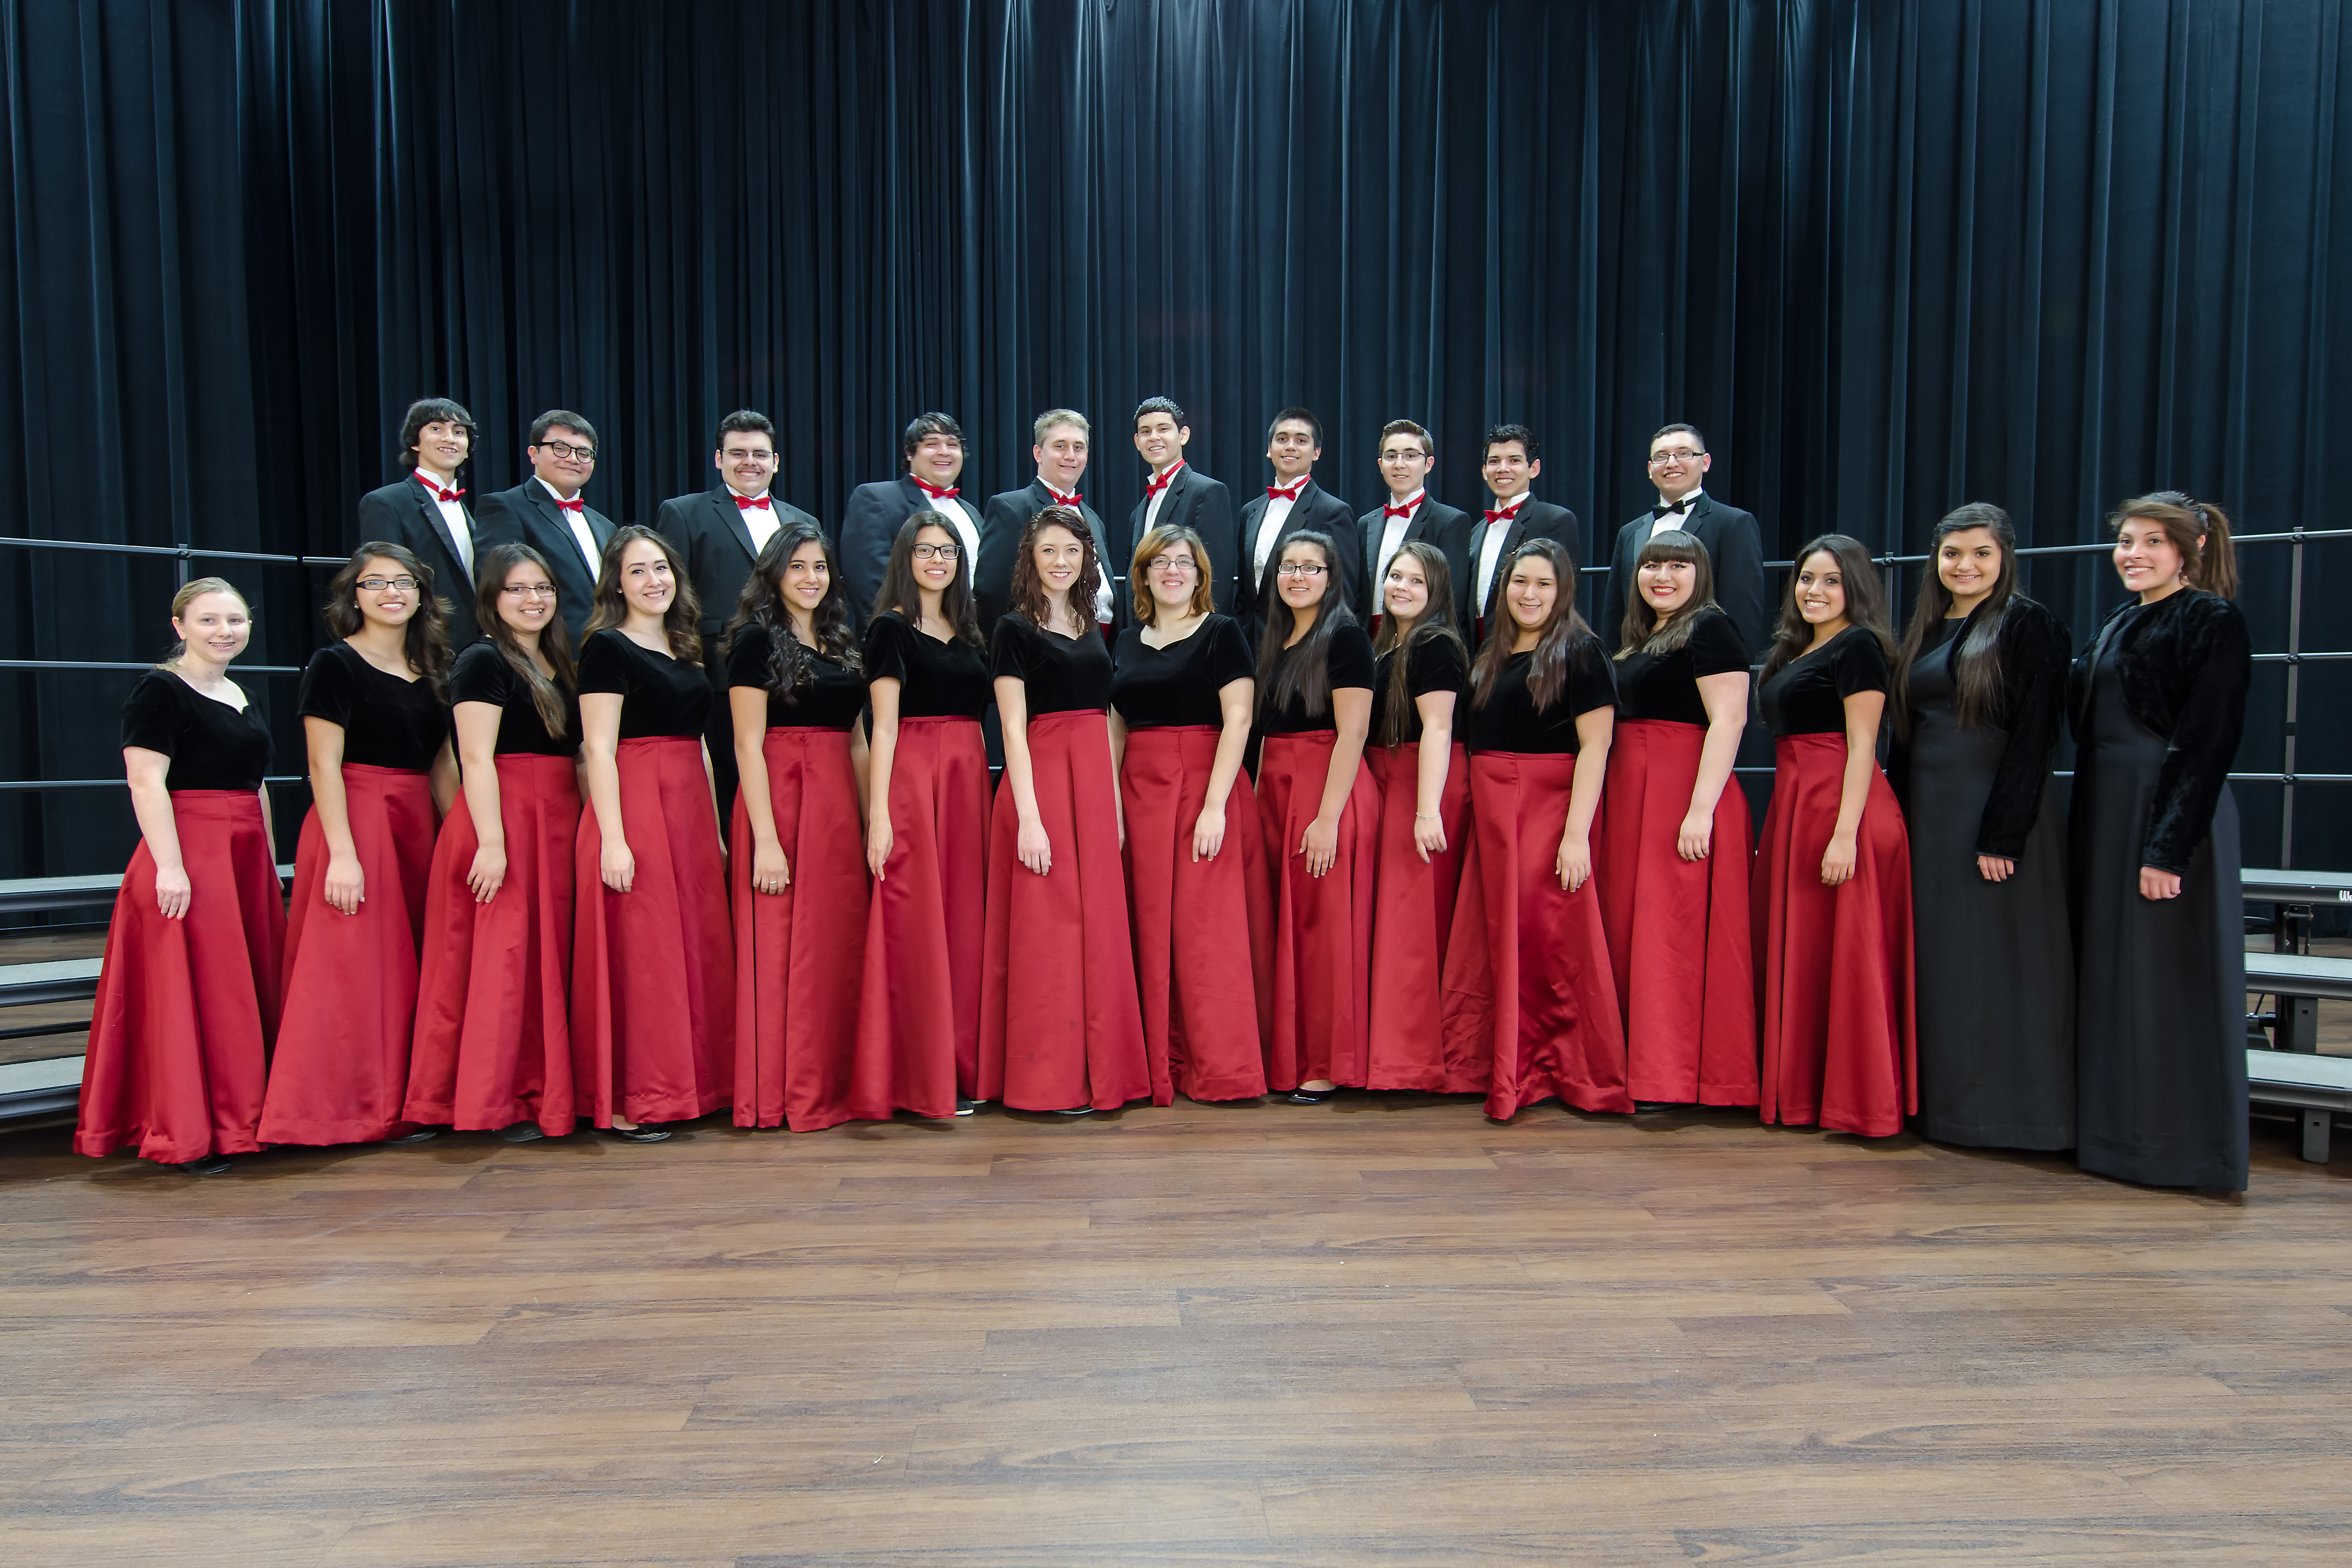 High school band and choir students qualify for state solo and ensemble competition